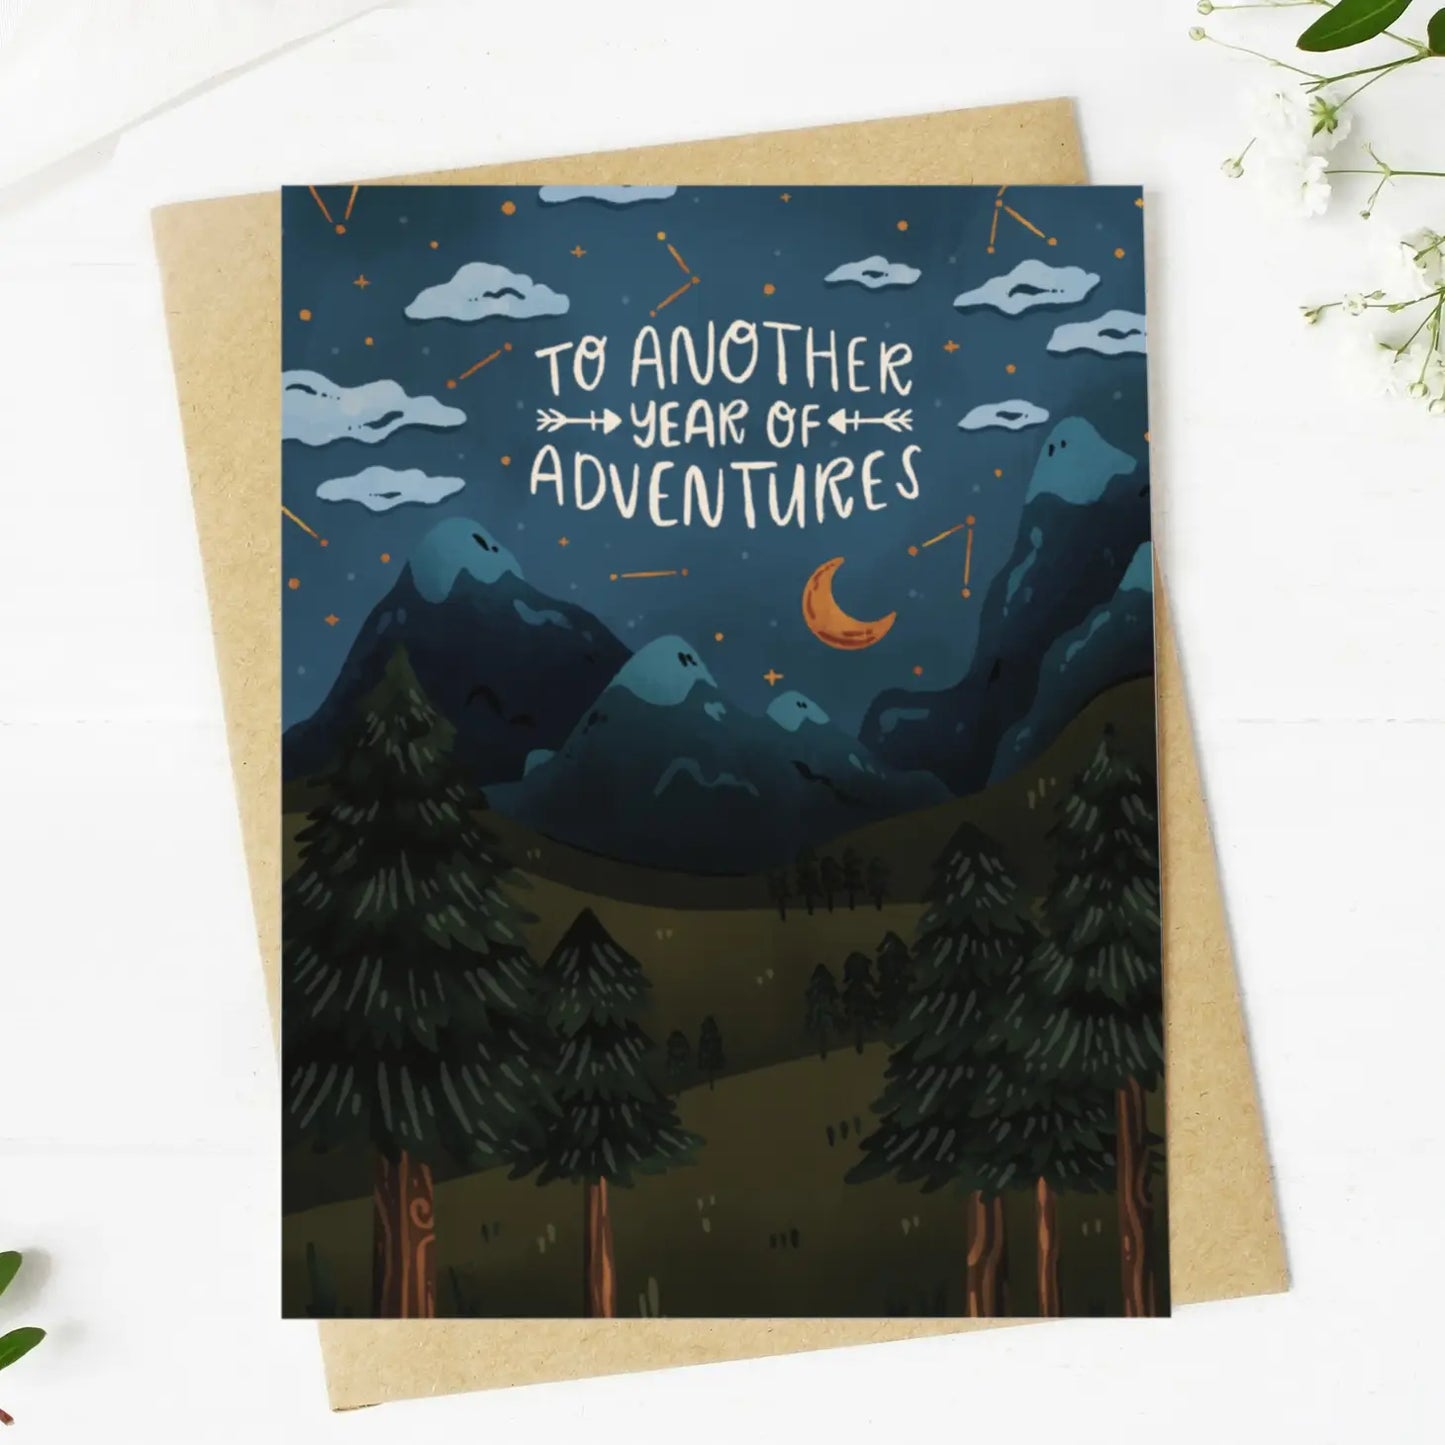 "To Another Year of Adventures" Greeting Card